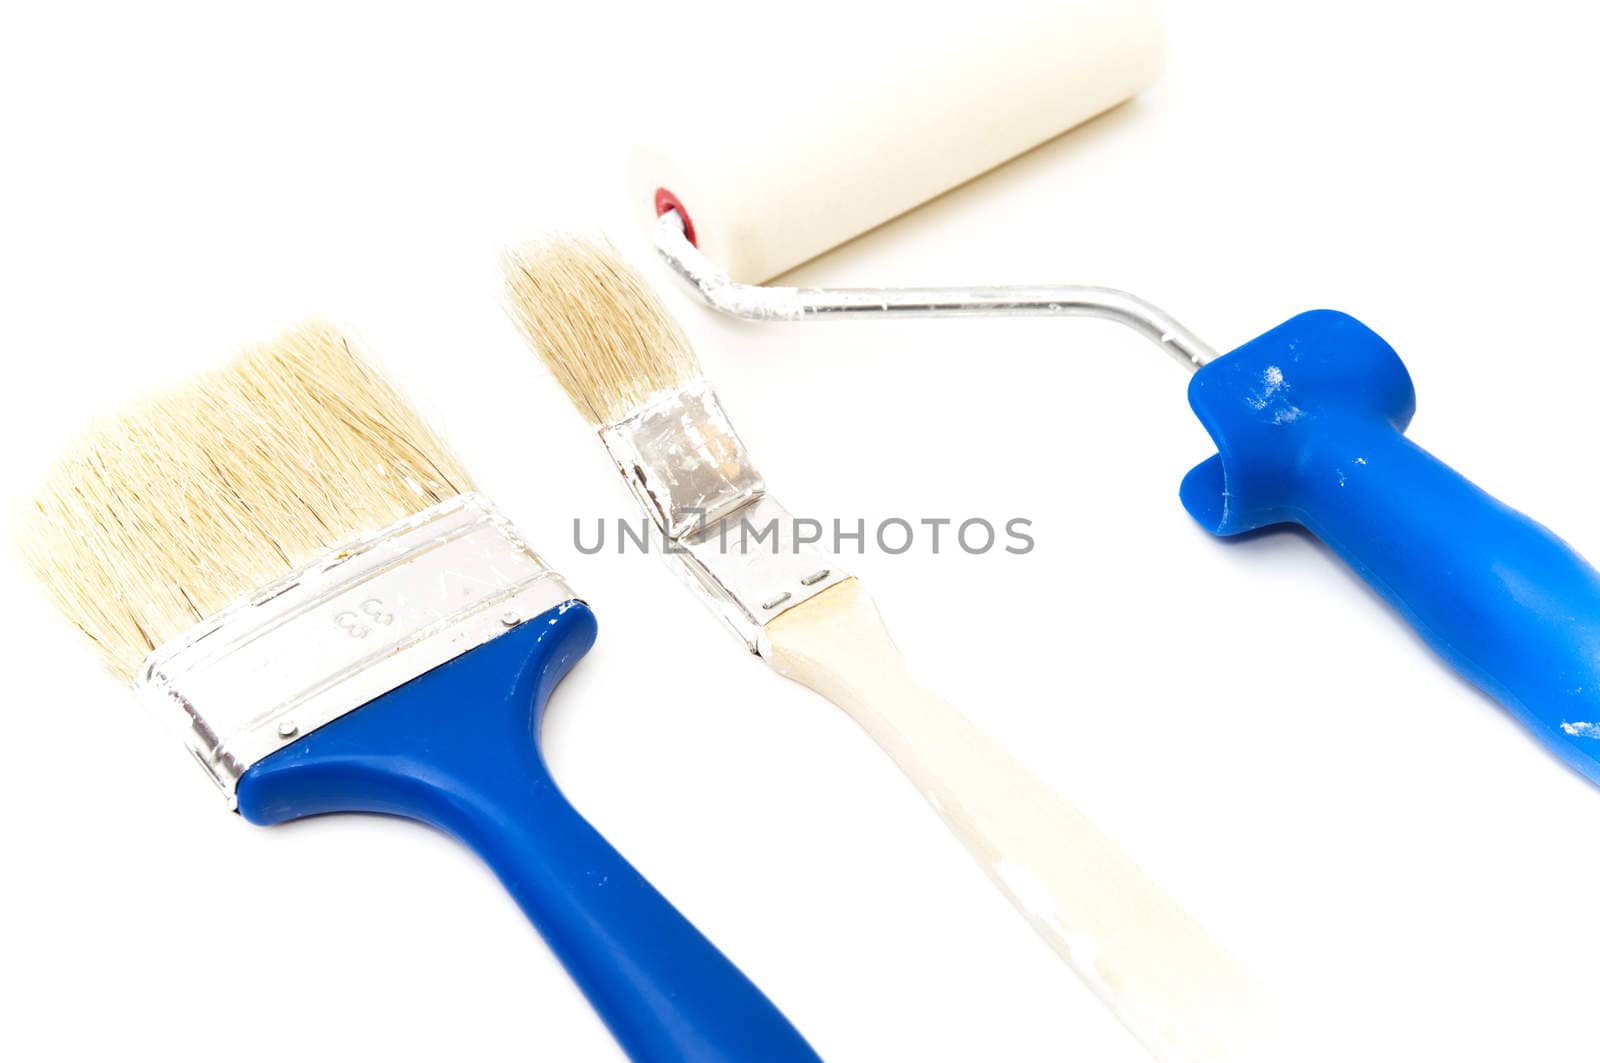 Painter tools on a white background